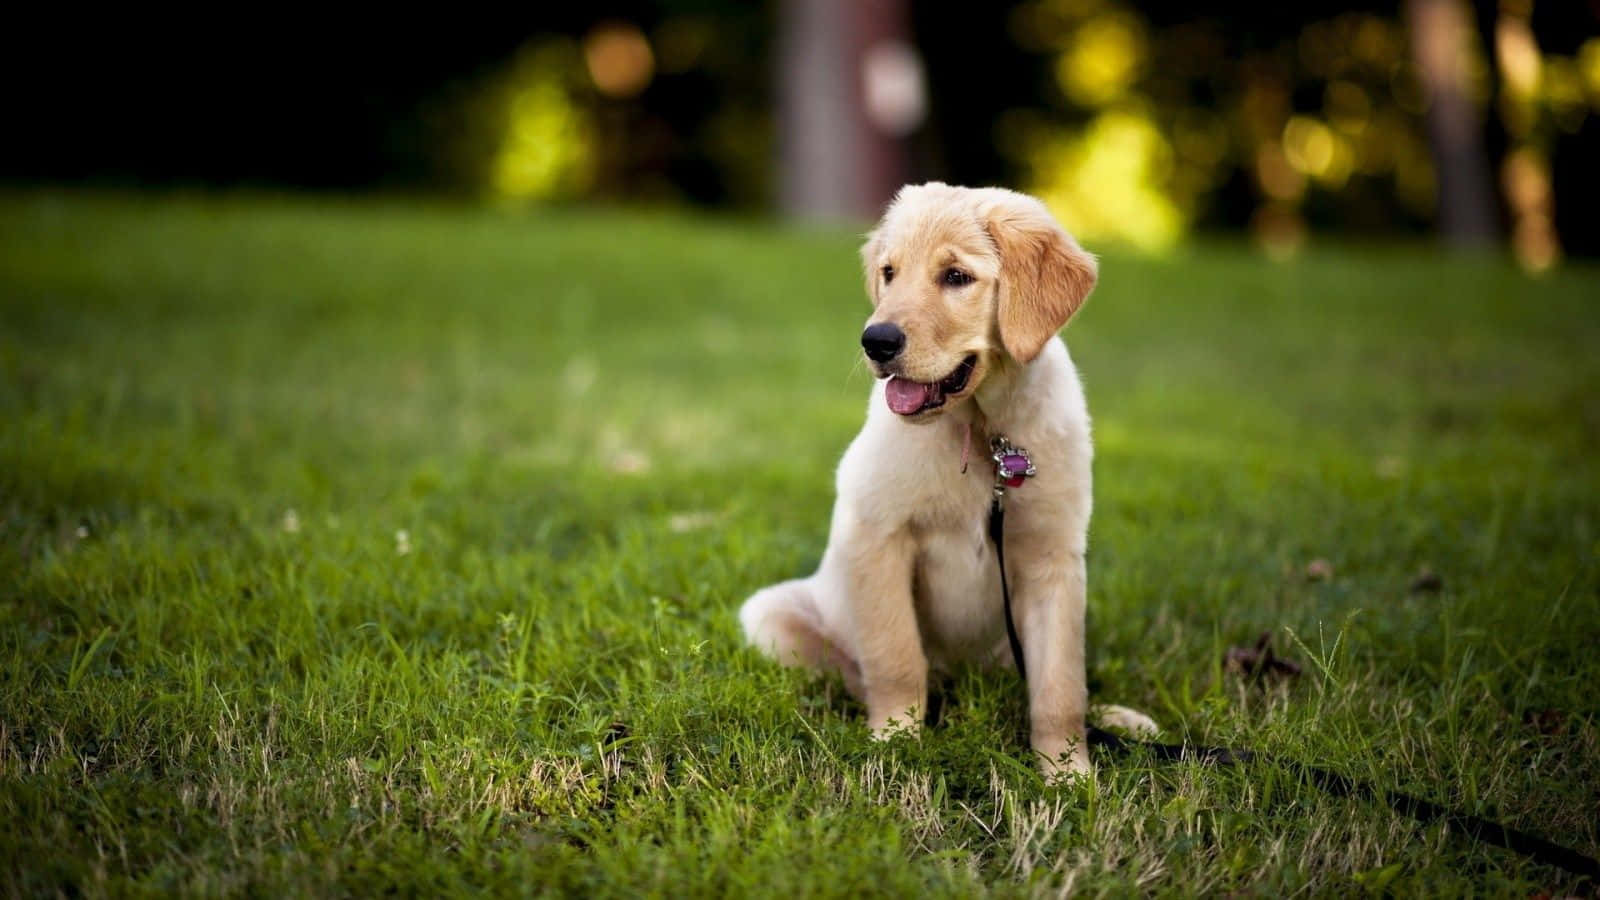 Labrador Puppy With Violet Leash Picture